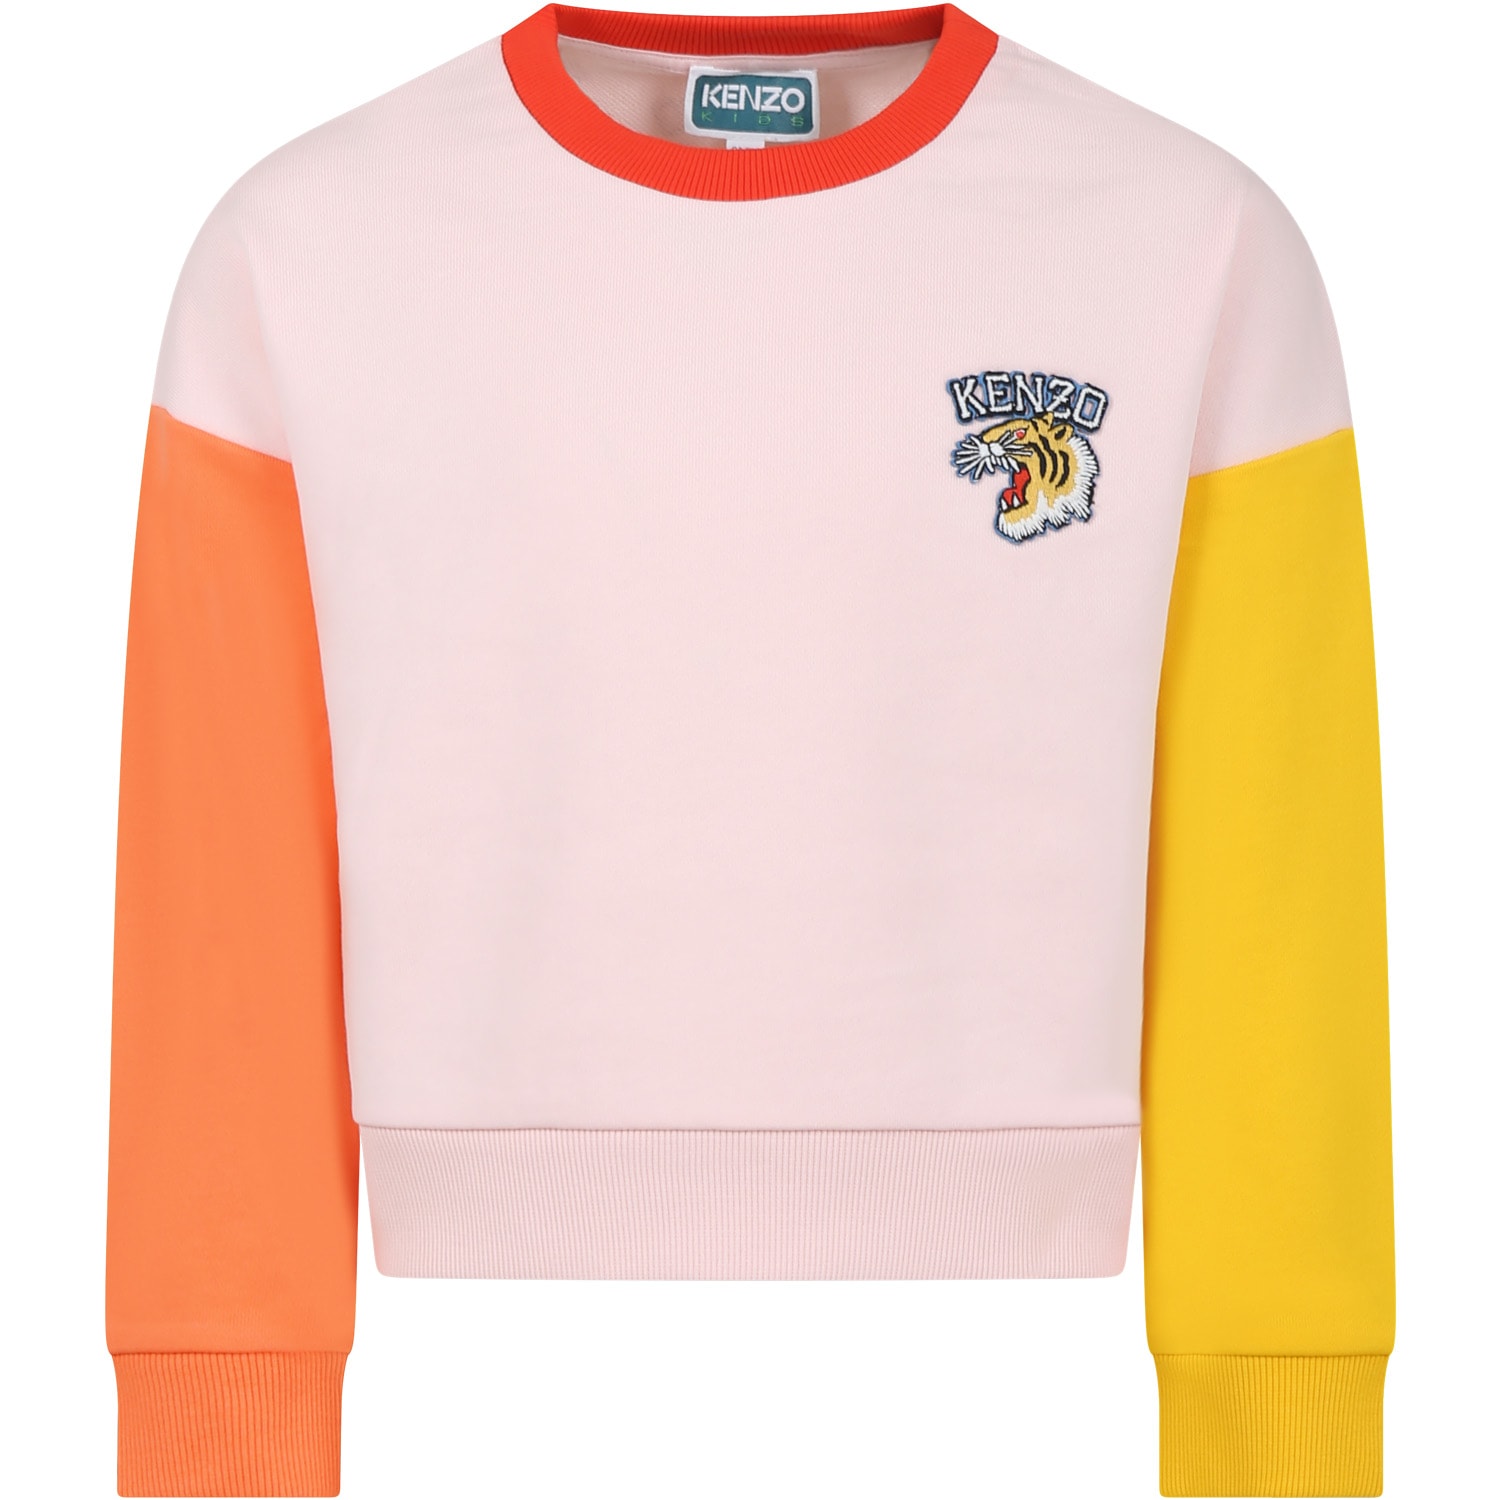 Shop Kenzo Multicolored Sweatshirt For Girl With Iconic Tiger And Logo